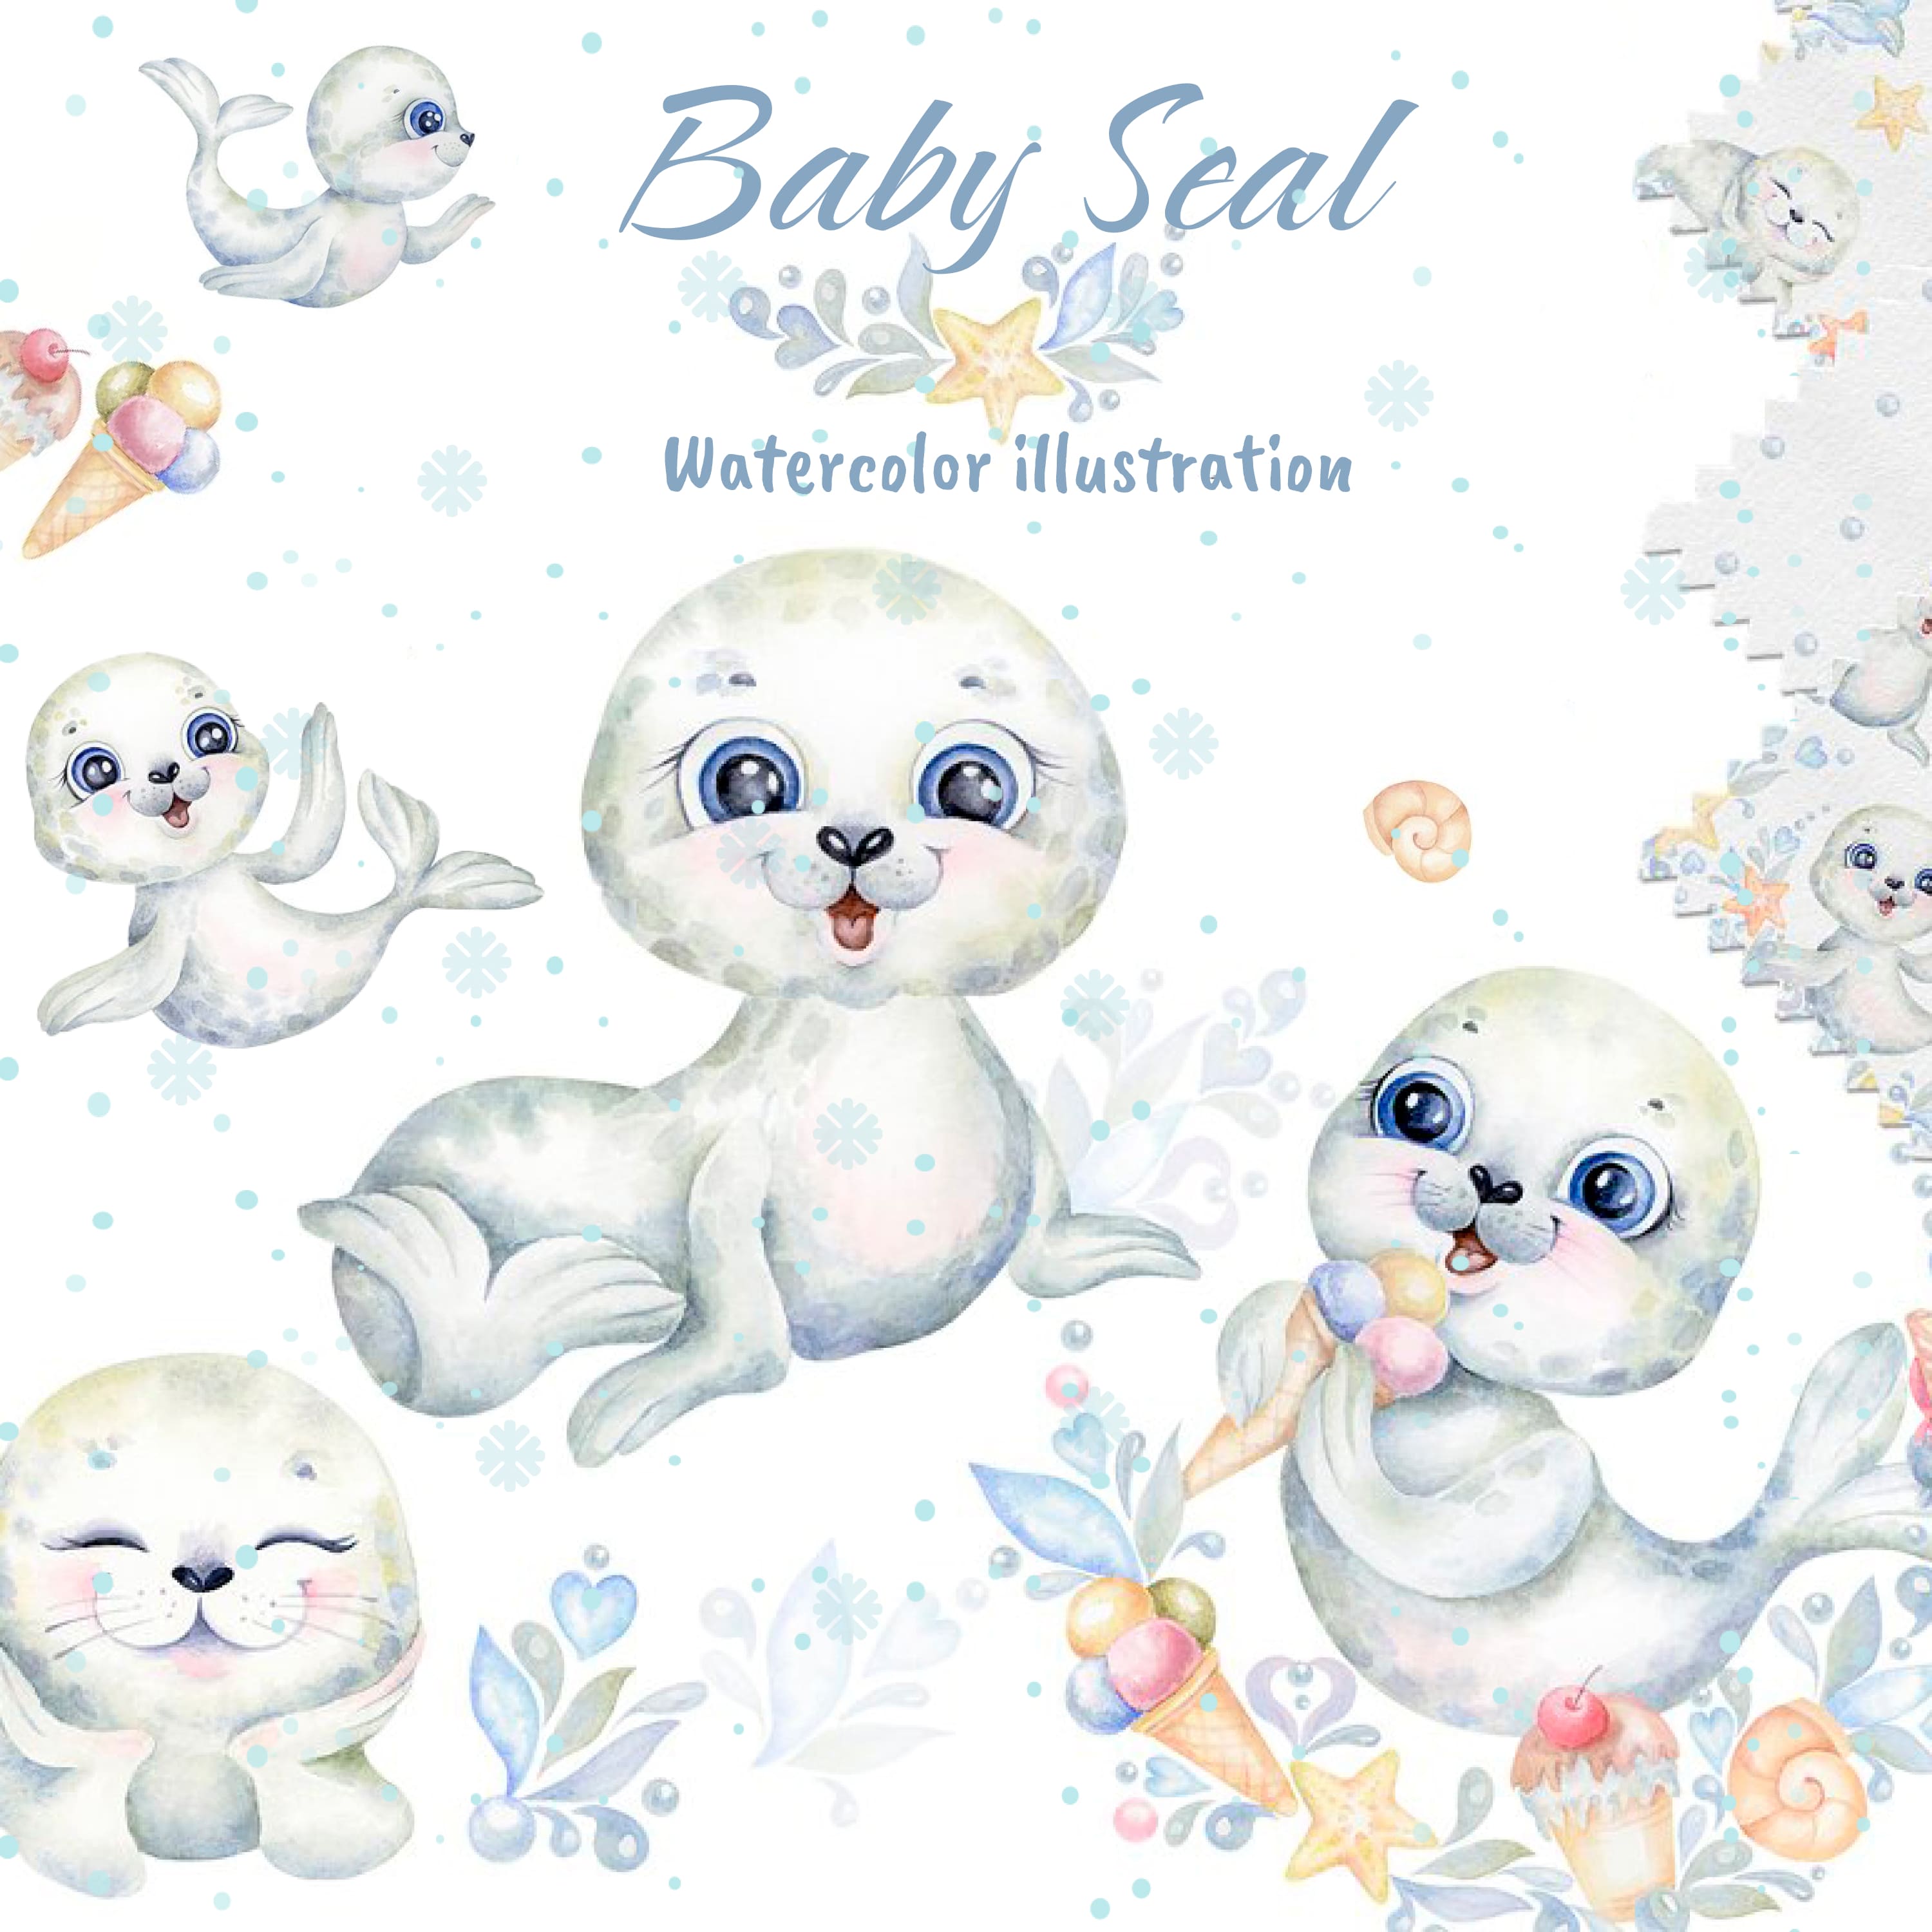 Baby Seal animals clipart & pattern cover.